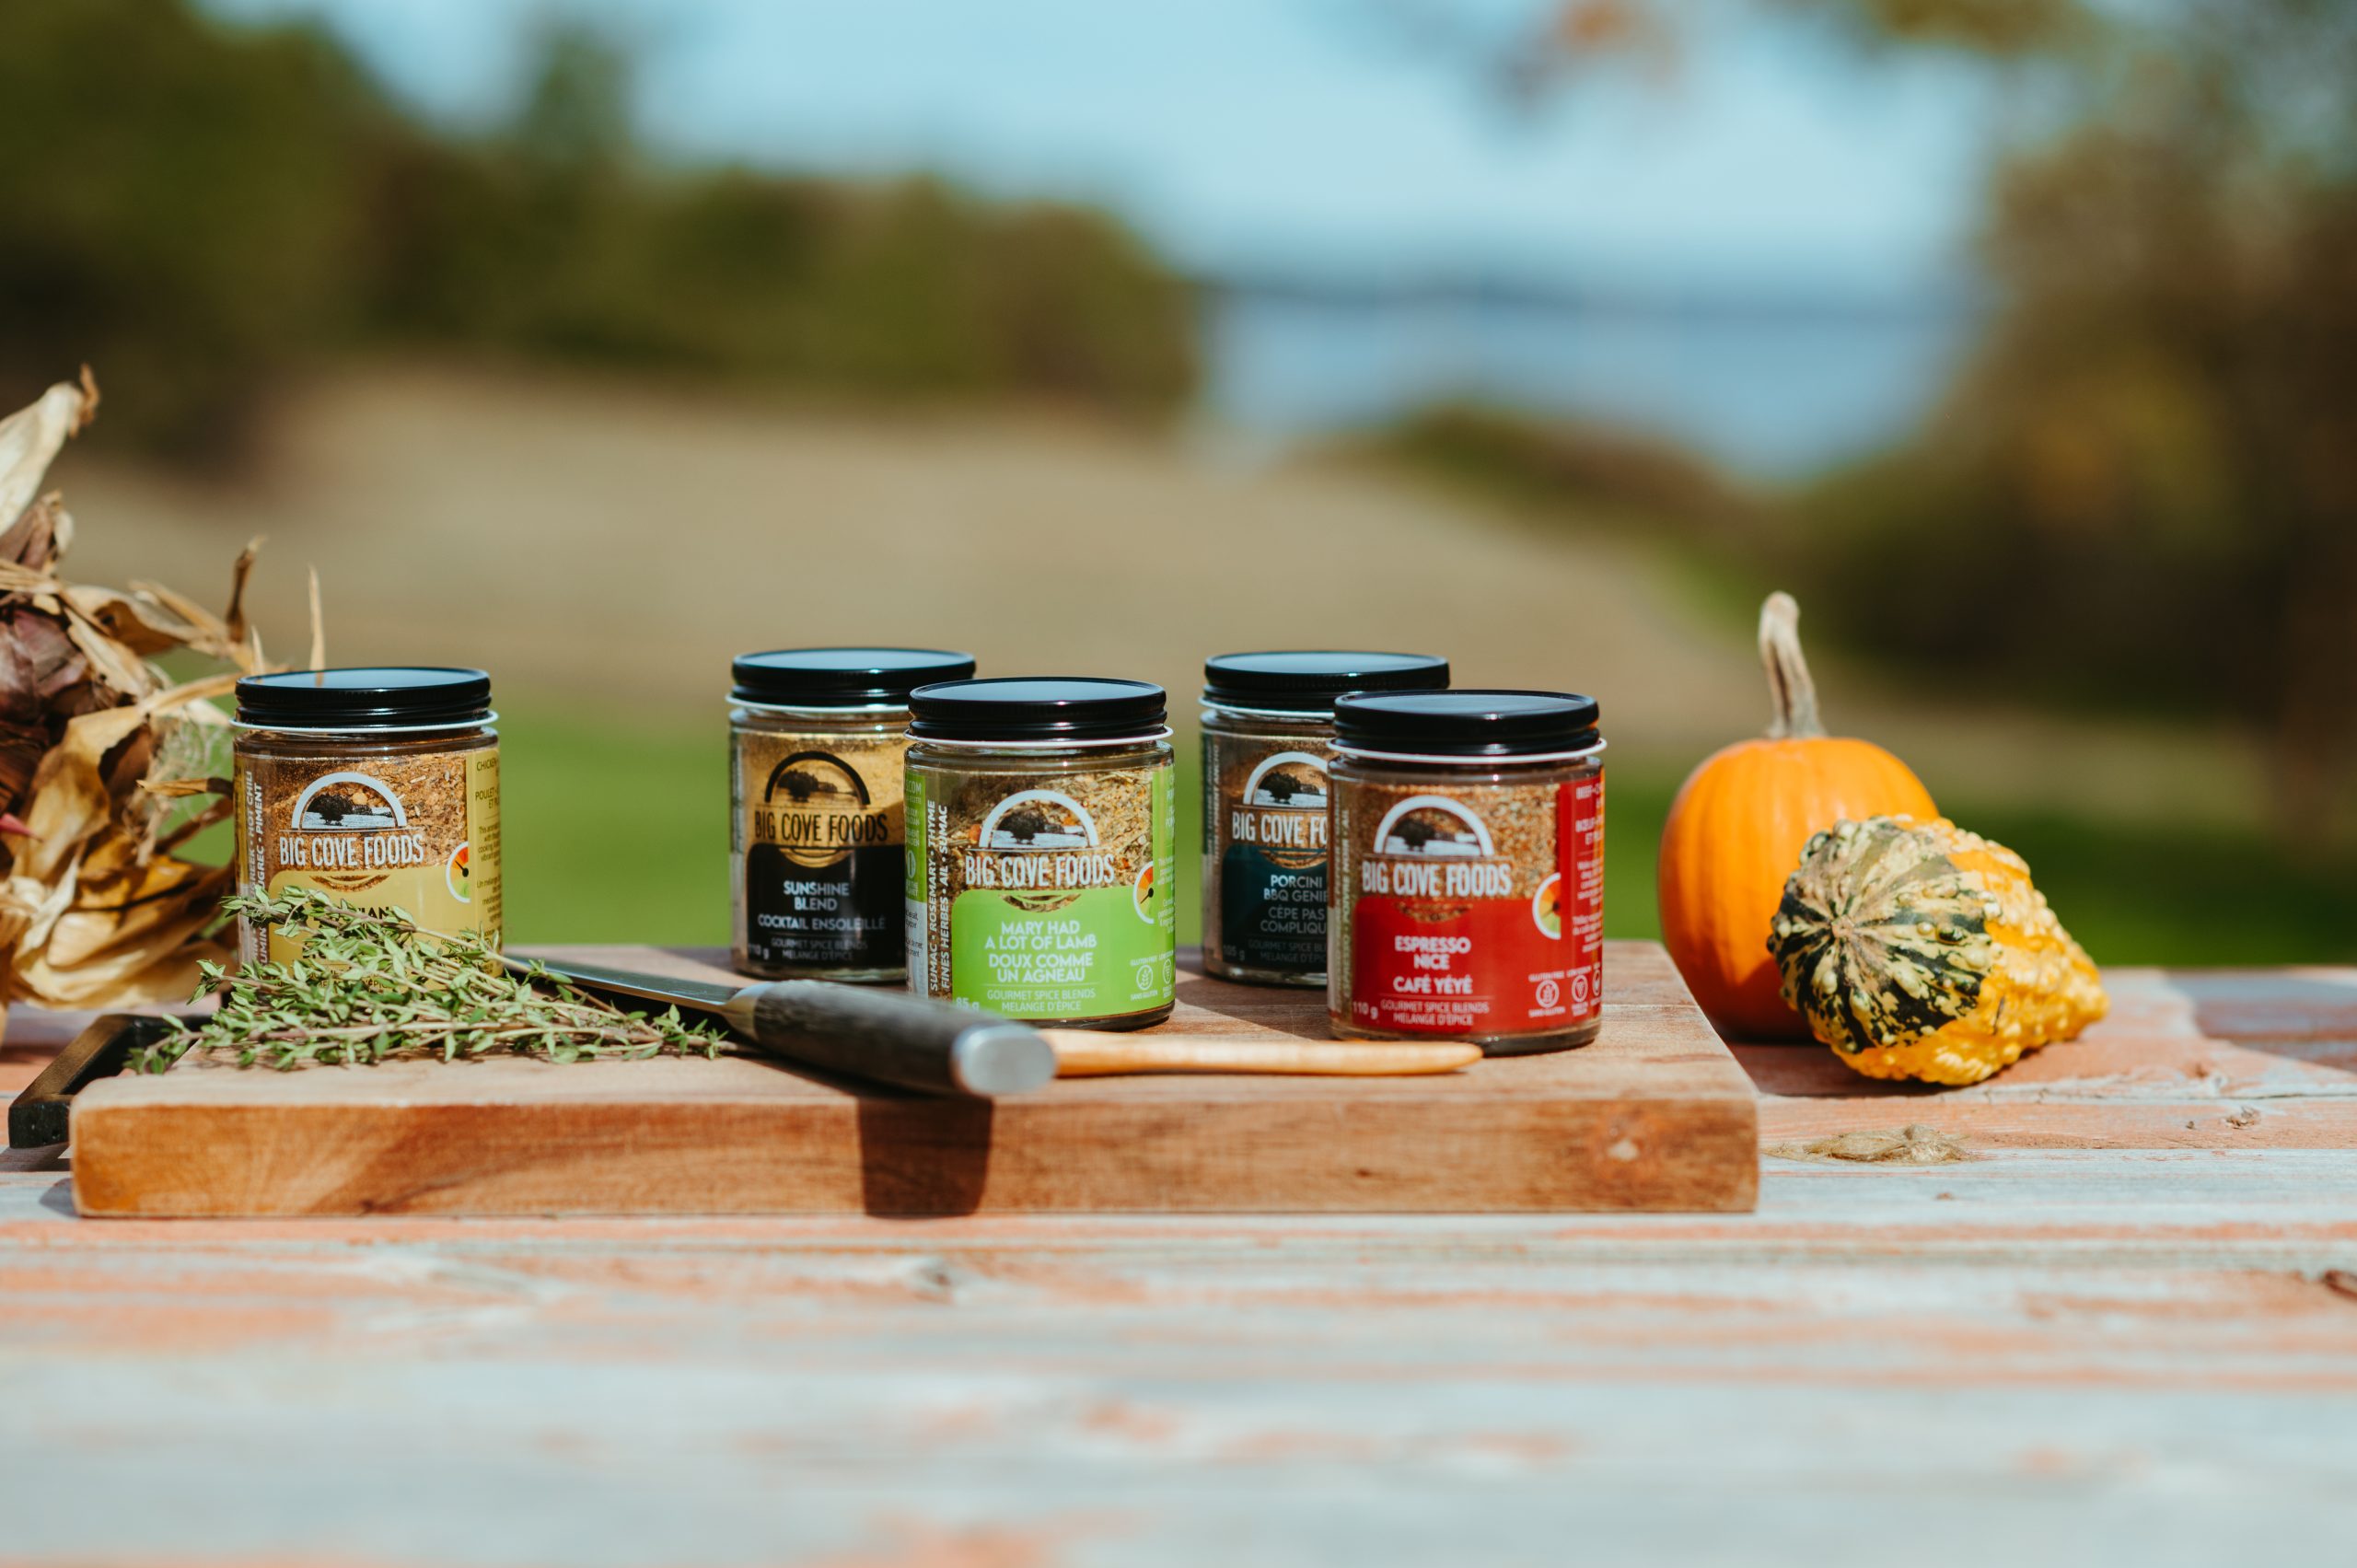 Big Cove Spice Blend Gift Ideas for foodies